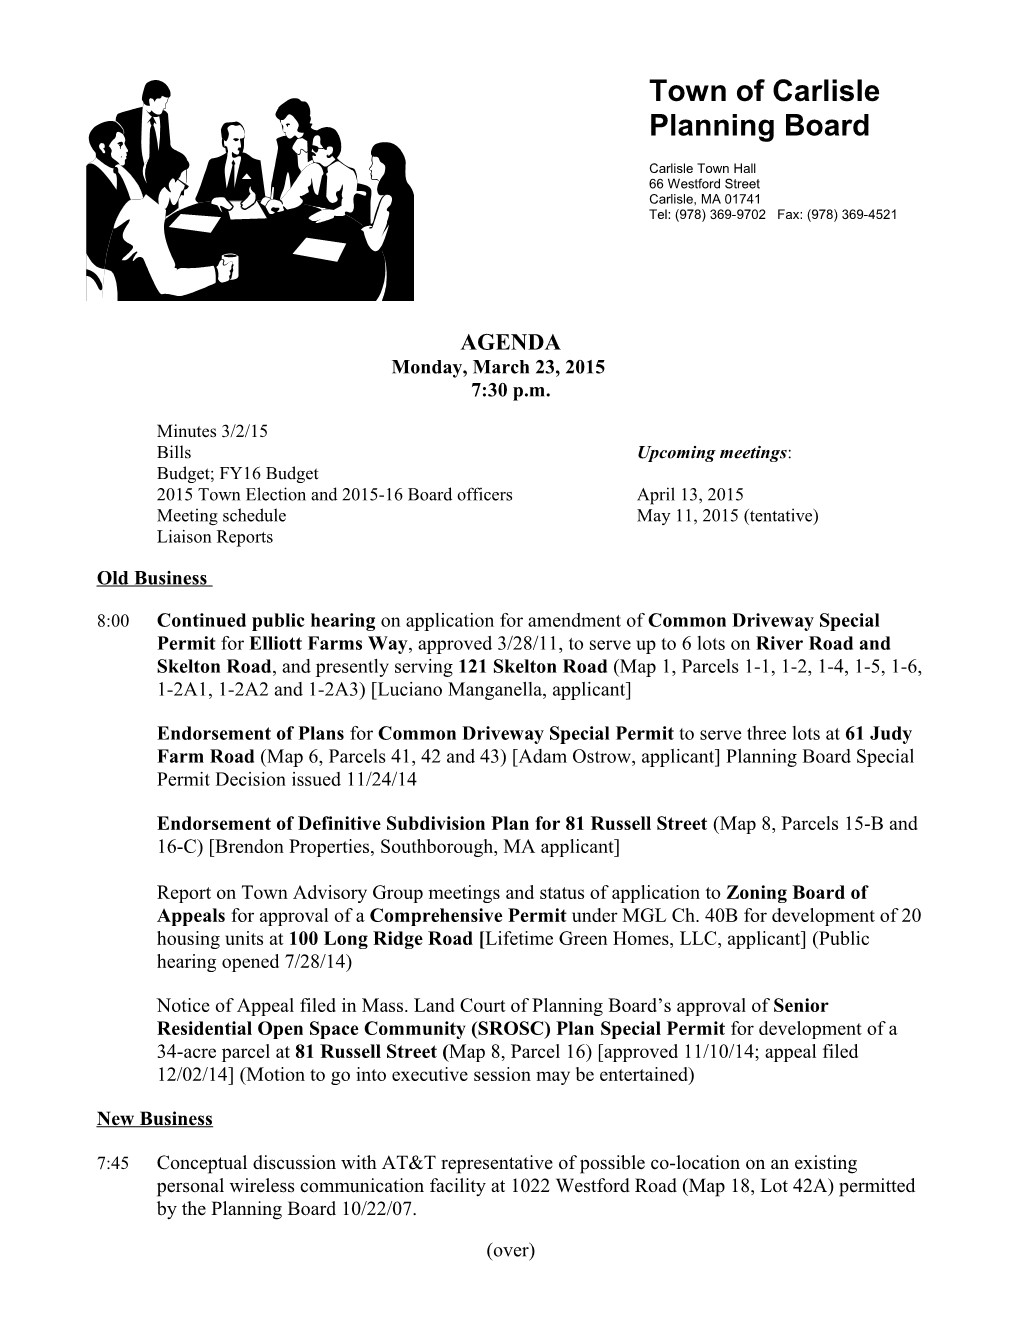 Town of Carlisle Planning Board s2